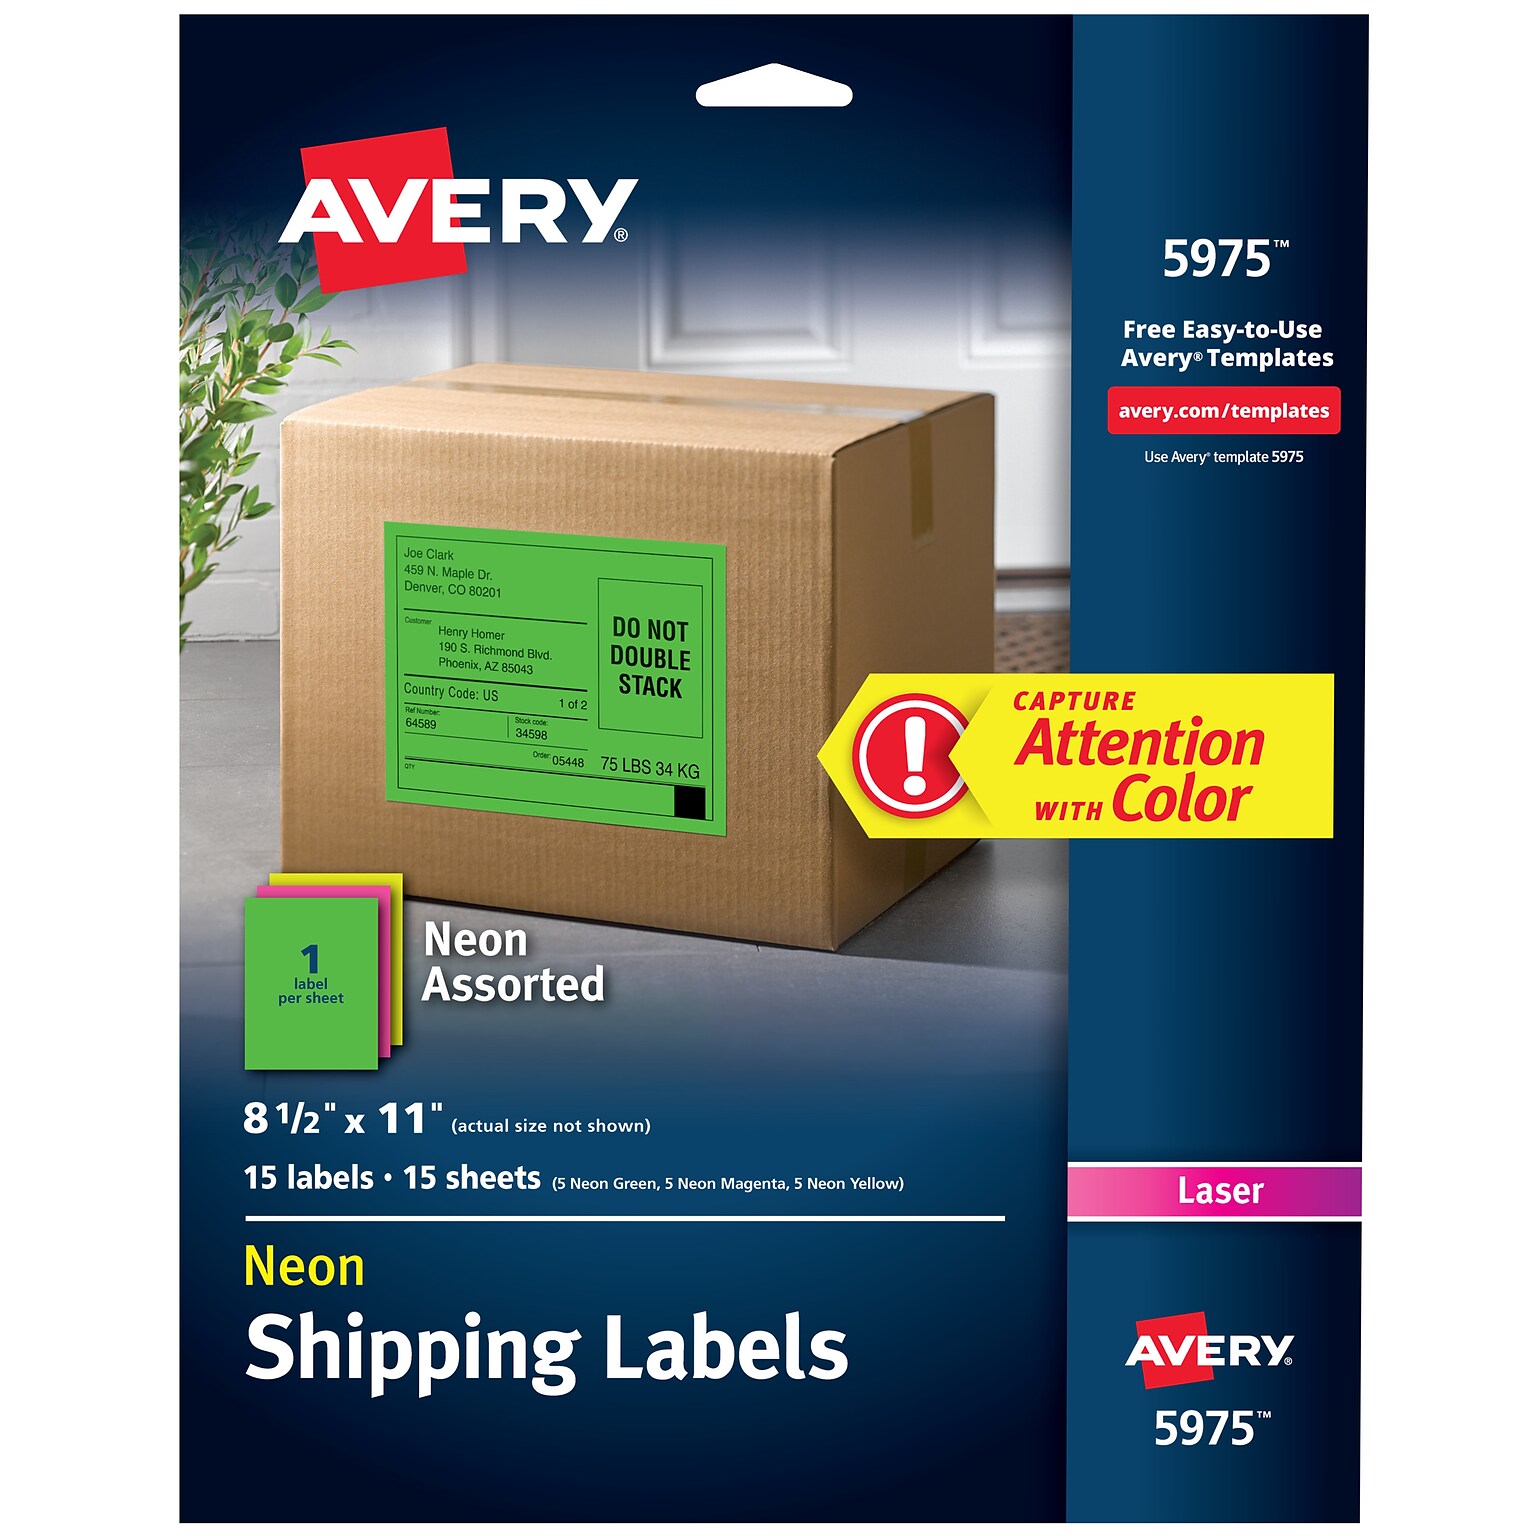 Avery Laser Shipping Labels, 8-1/2 x 11, Assorted Neon Colors, 1 Label/Sheet, 15 Sheets/Pack (5975)